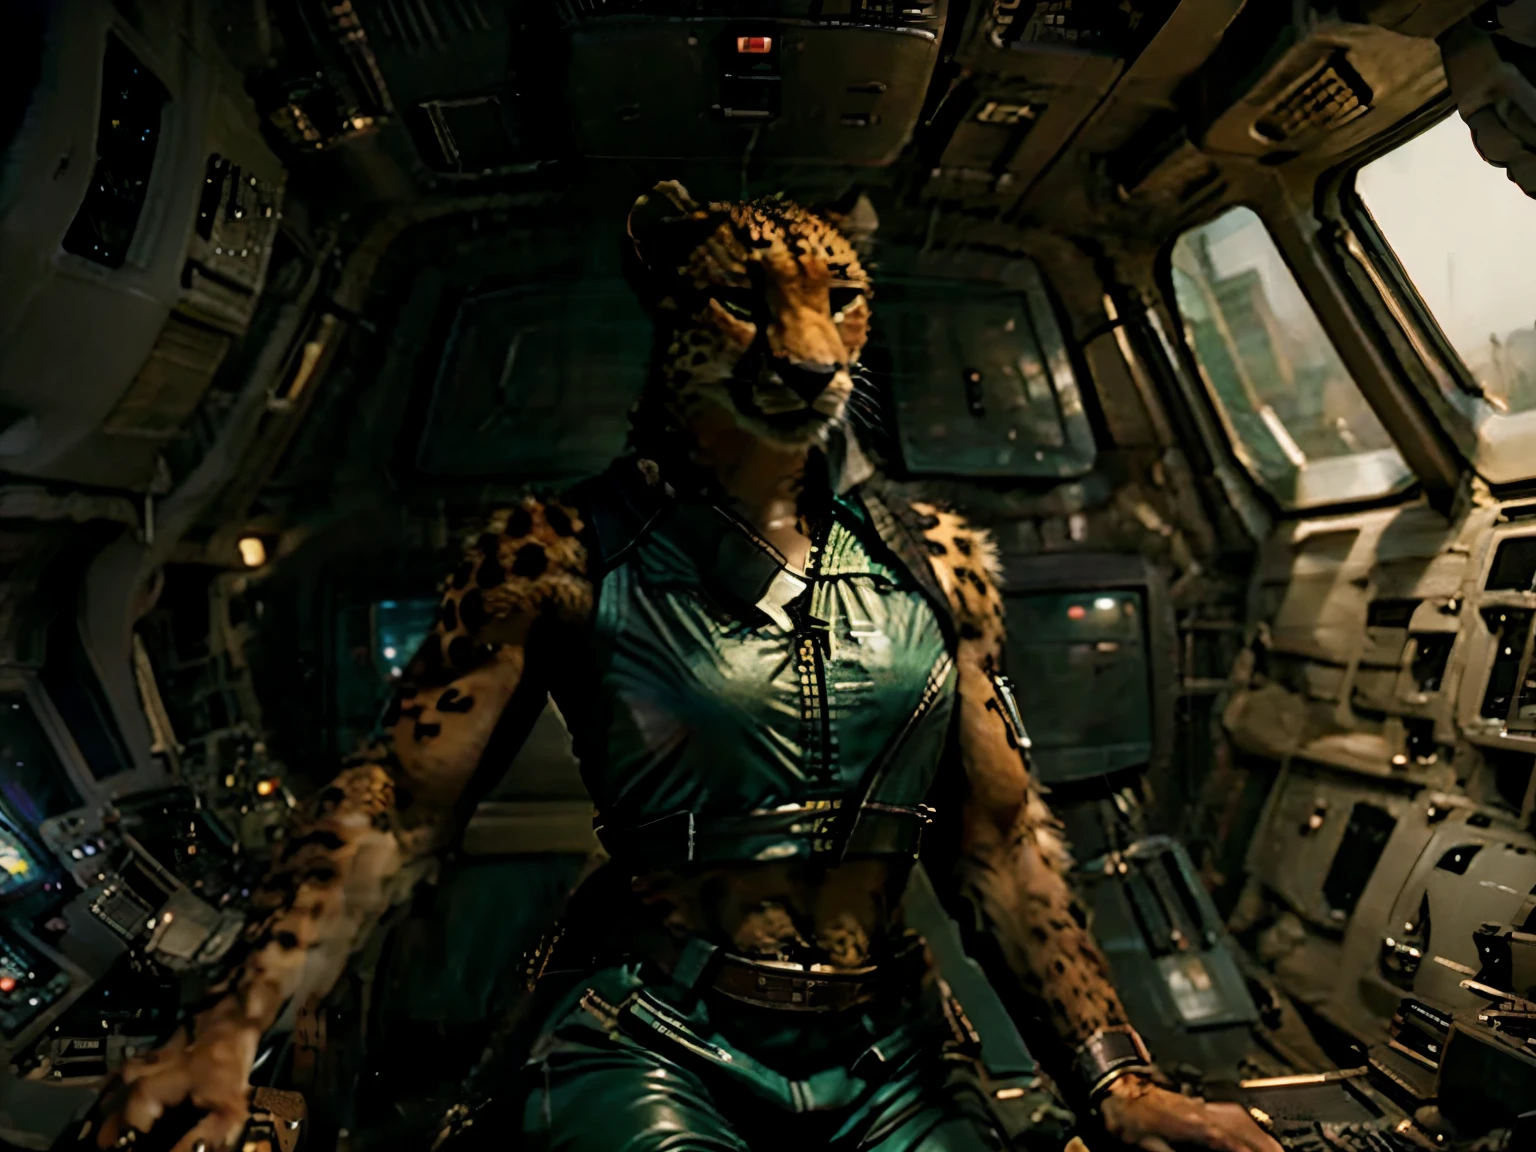 (male anthropomorphic cheetah in a flight suit), photo realistic anthro cheetah pilot in a space ship, hyper realistic cheetah, spaceship interior, space carrier interior, masterpiece, futuristic carrier scene, cheetah fighter pilot, hyper realistic cheetah pilot in a spaceship